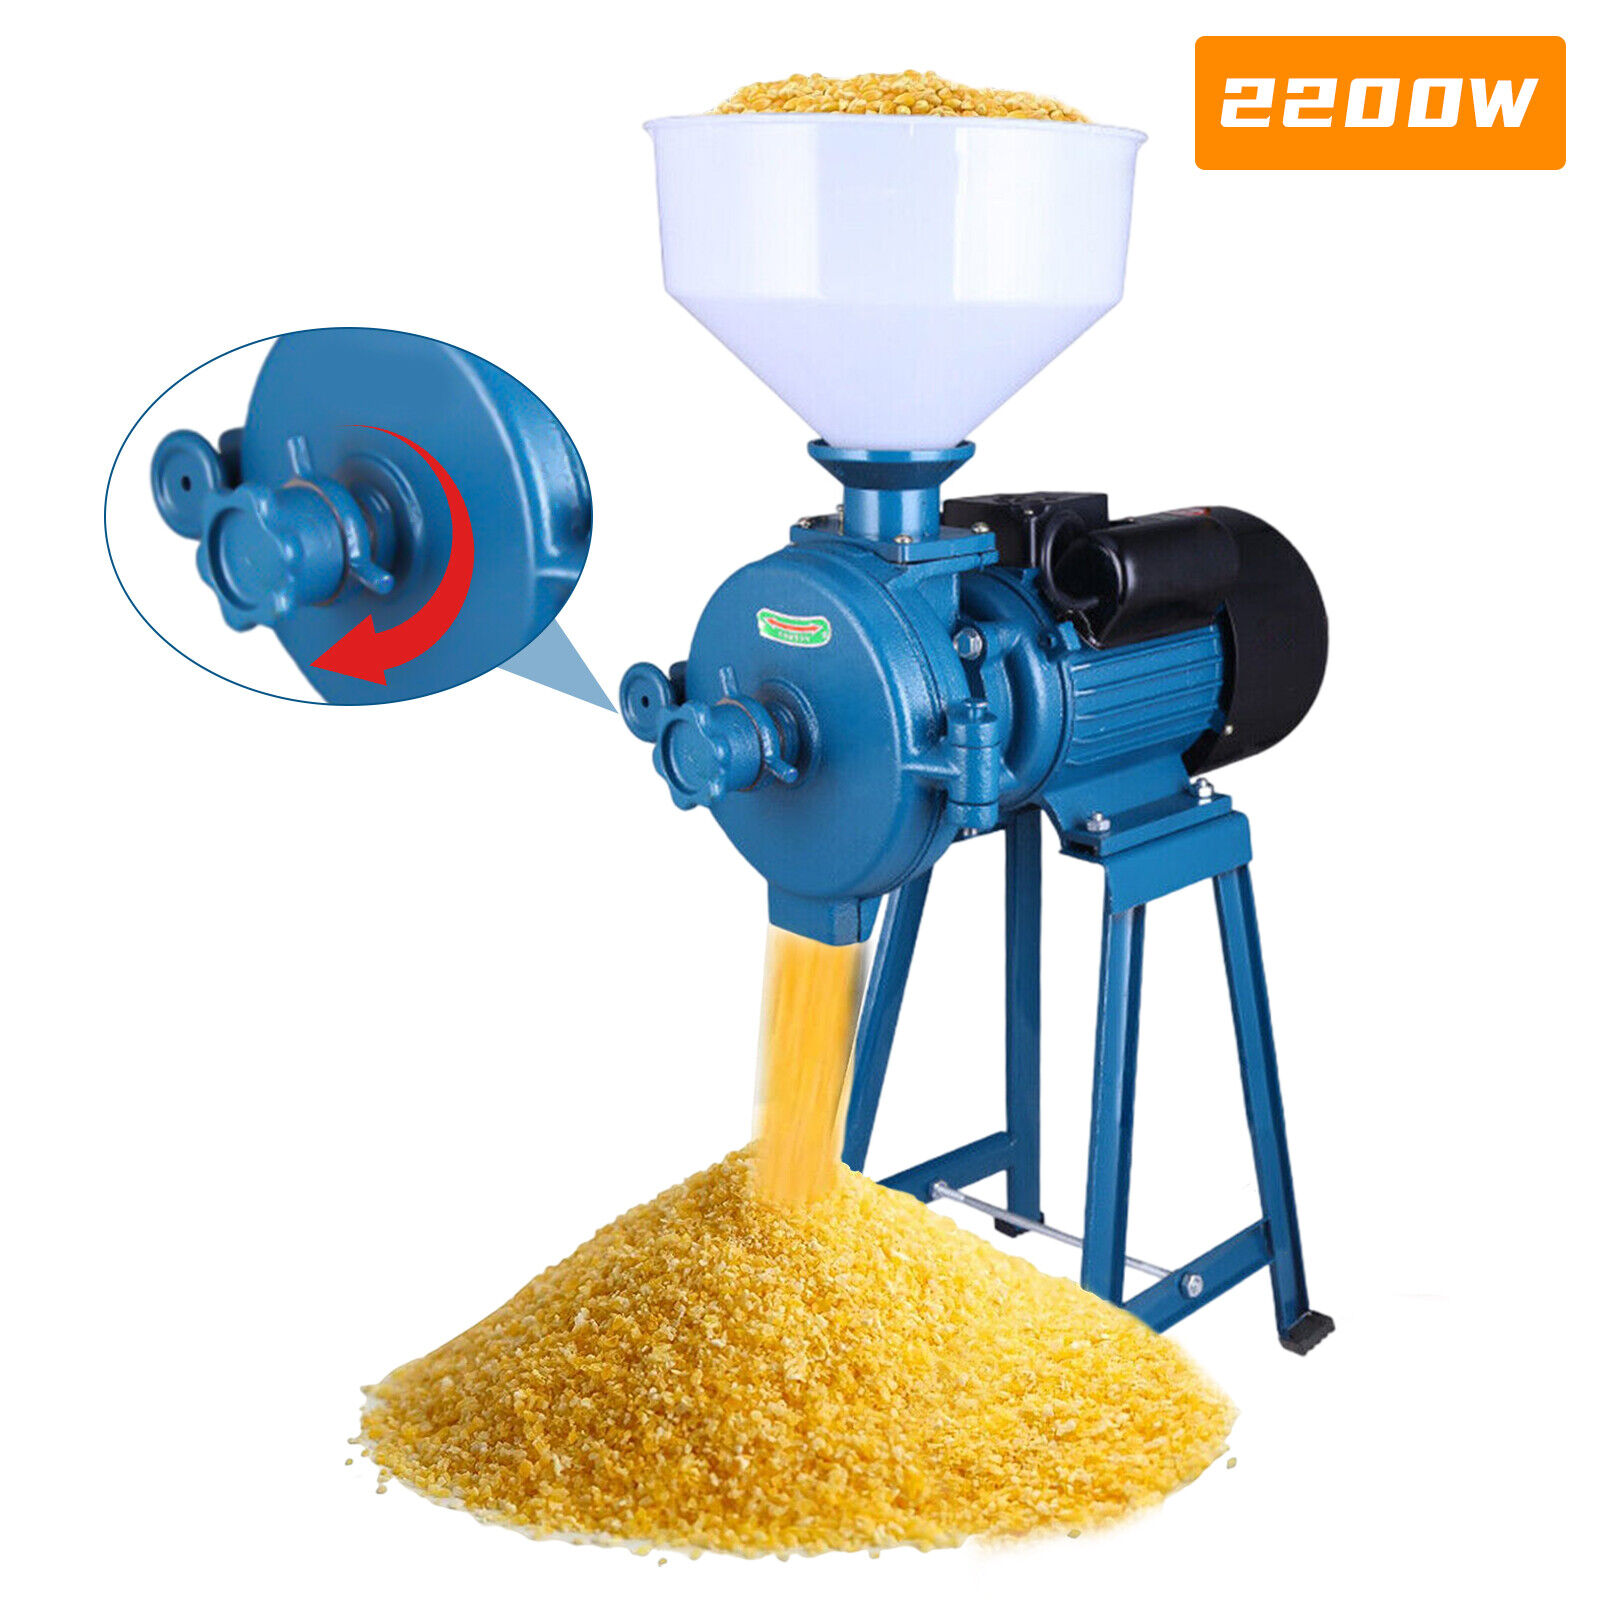 2200W 110V Electric Grinder Mill Grain Corn Wheat Feed Wet&Dry Cereal Machine